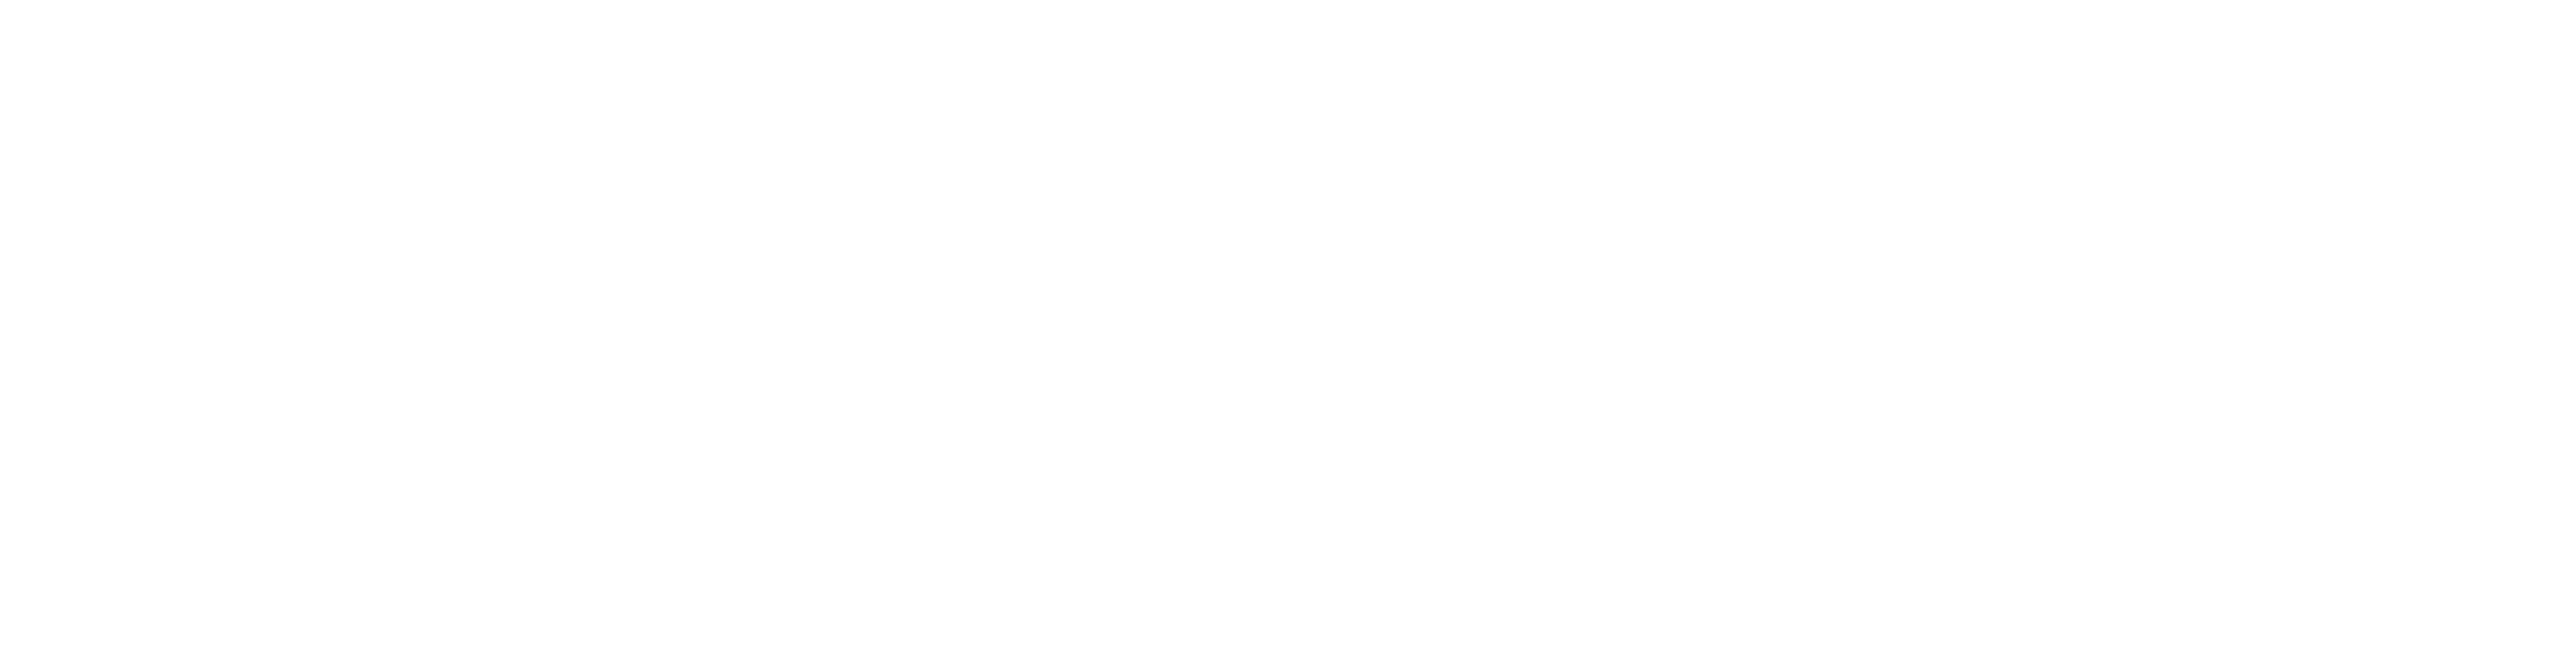 department of agricultural sciences